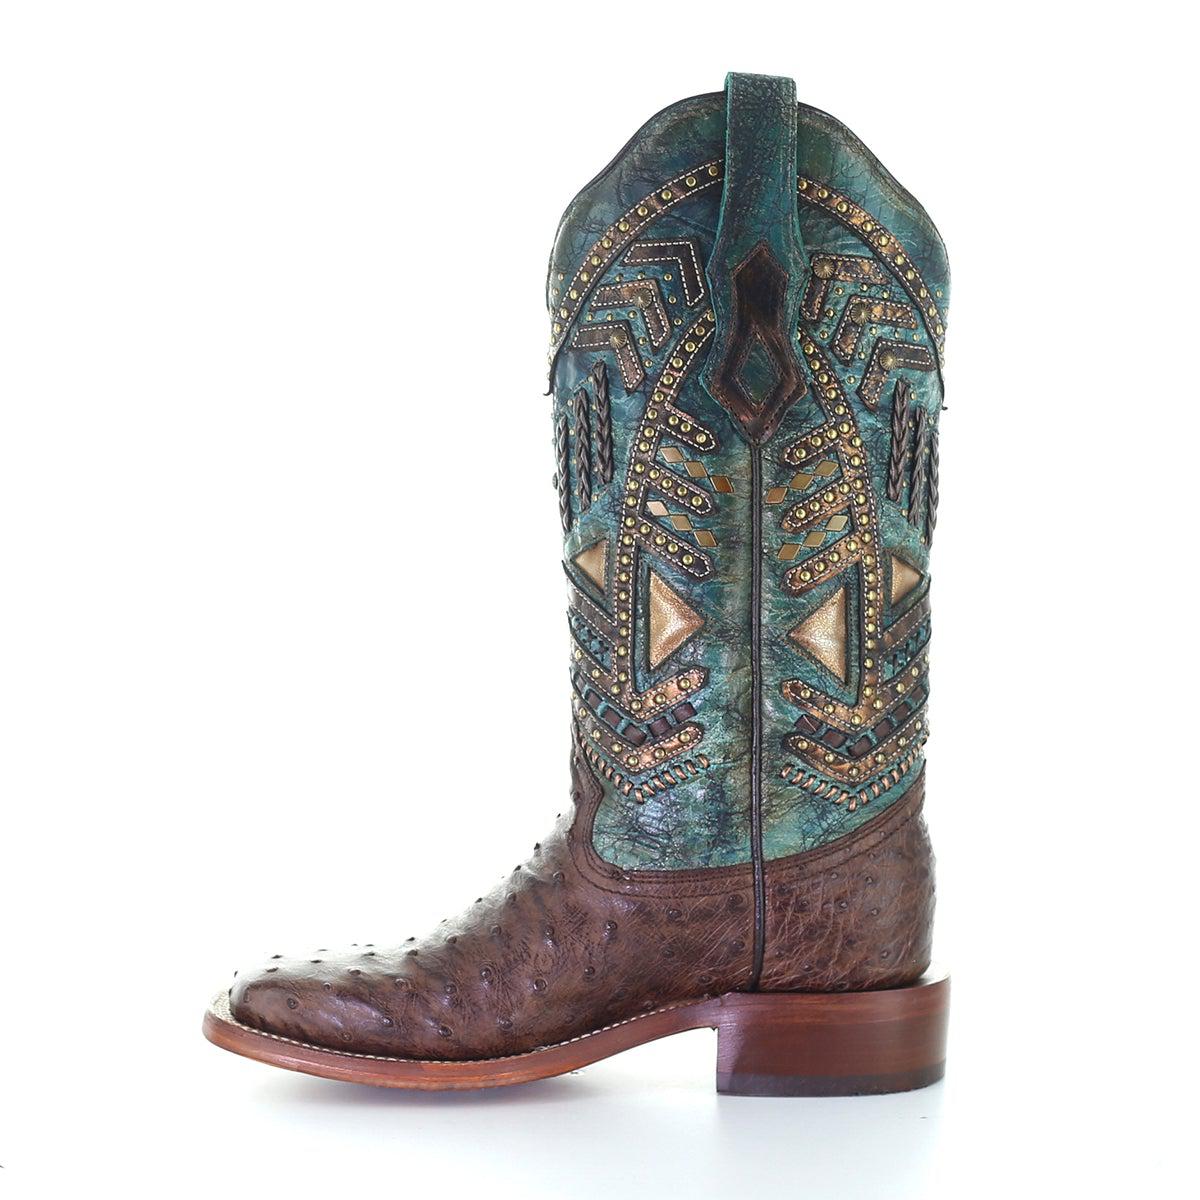 A4059 - Corral brown western cowgirl ostrich boots for women-BOOTS-kuet